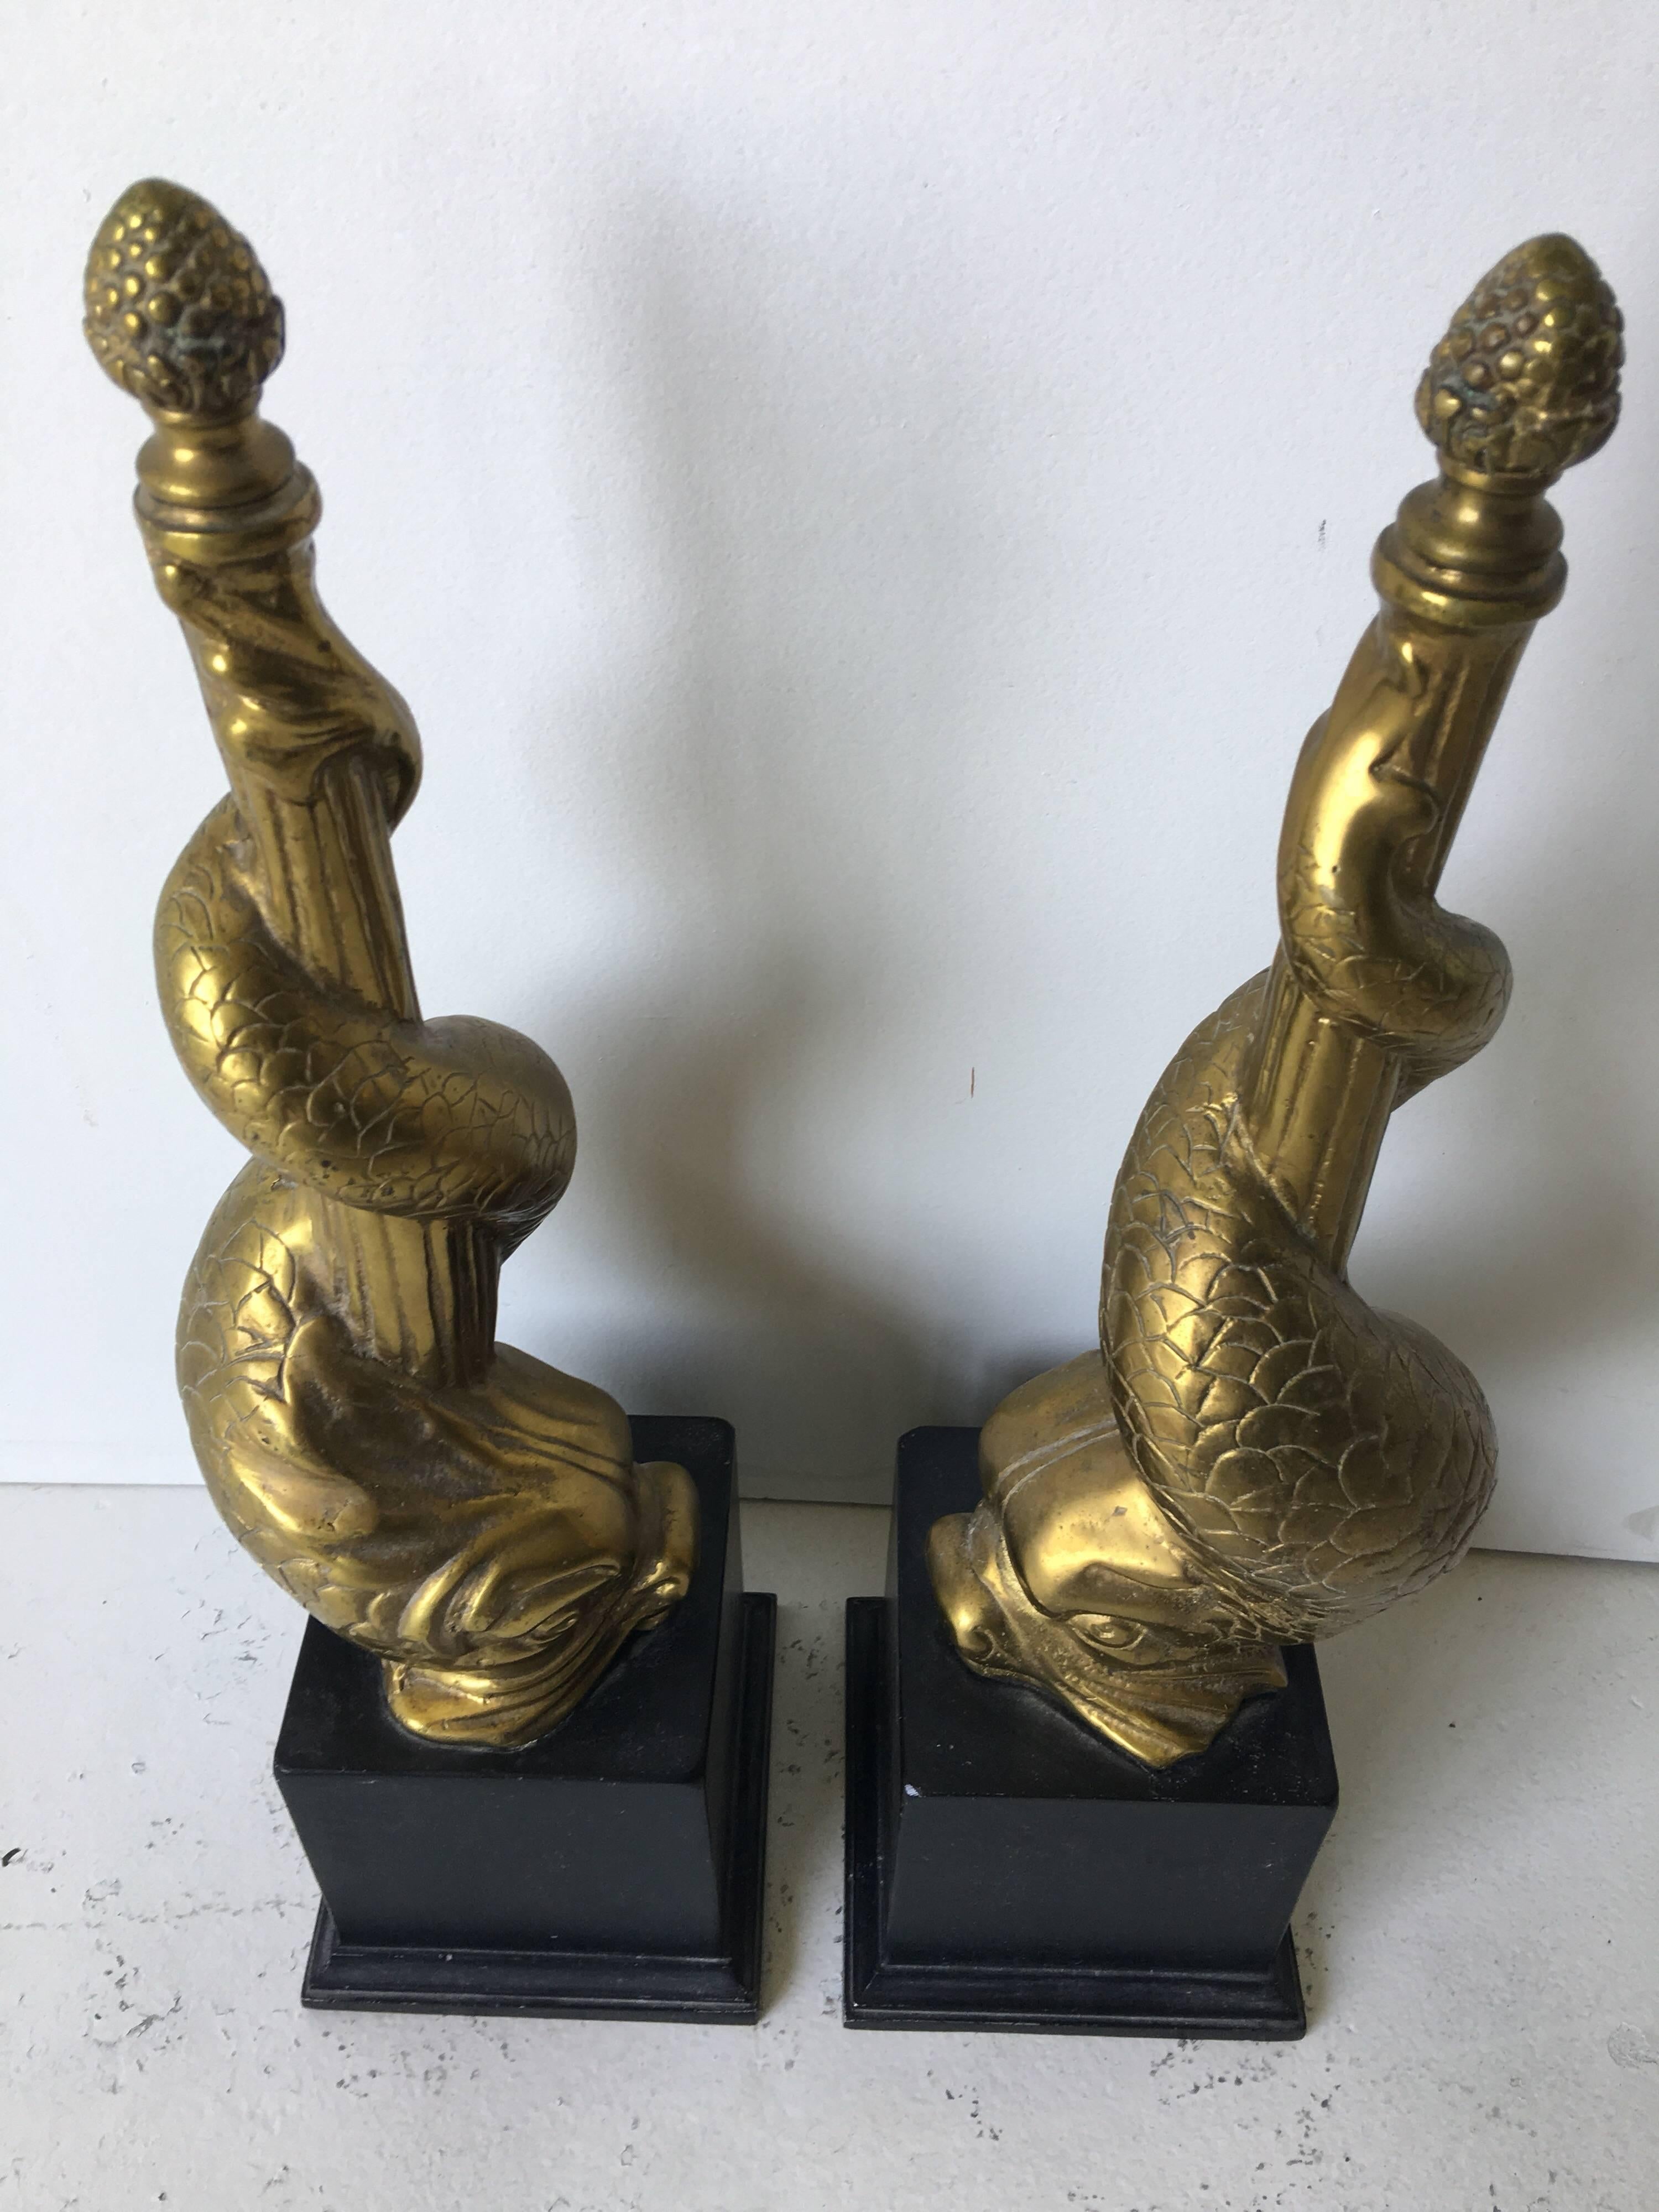 These are absolutely wonderful! These fireplace ornaments rest out in front, and feature downward spiraling figural dolphins on pedestals. There are finials to tops of fluted rods. Great Chenets or Andirons. They are very heavy in brass with cast